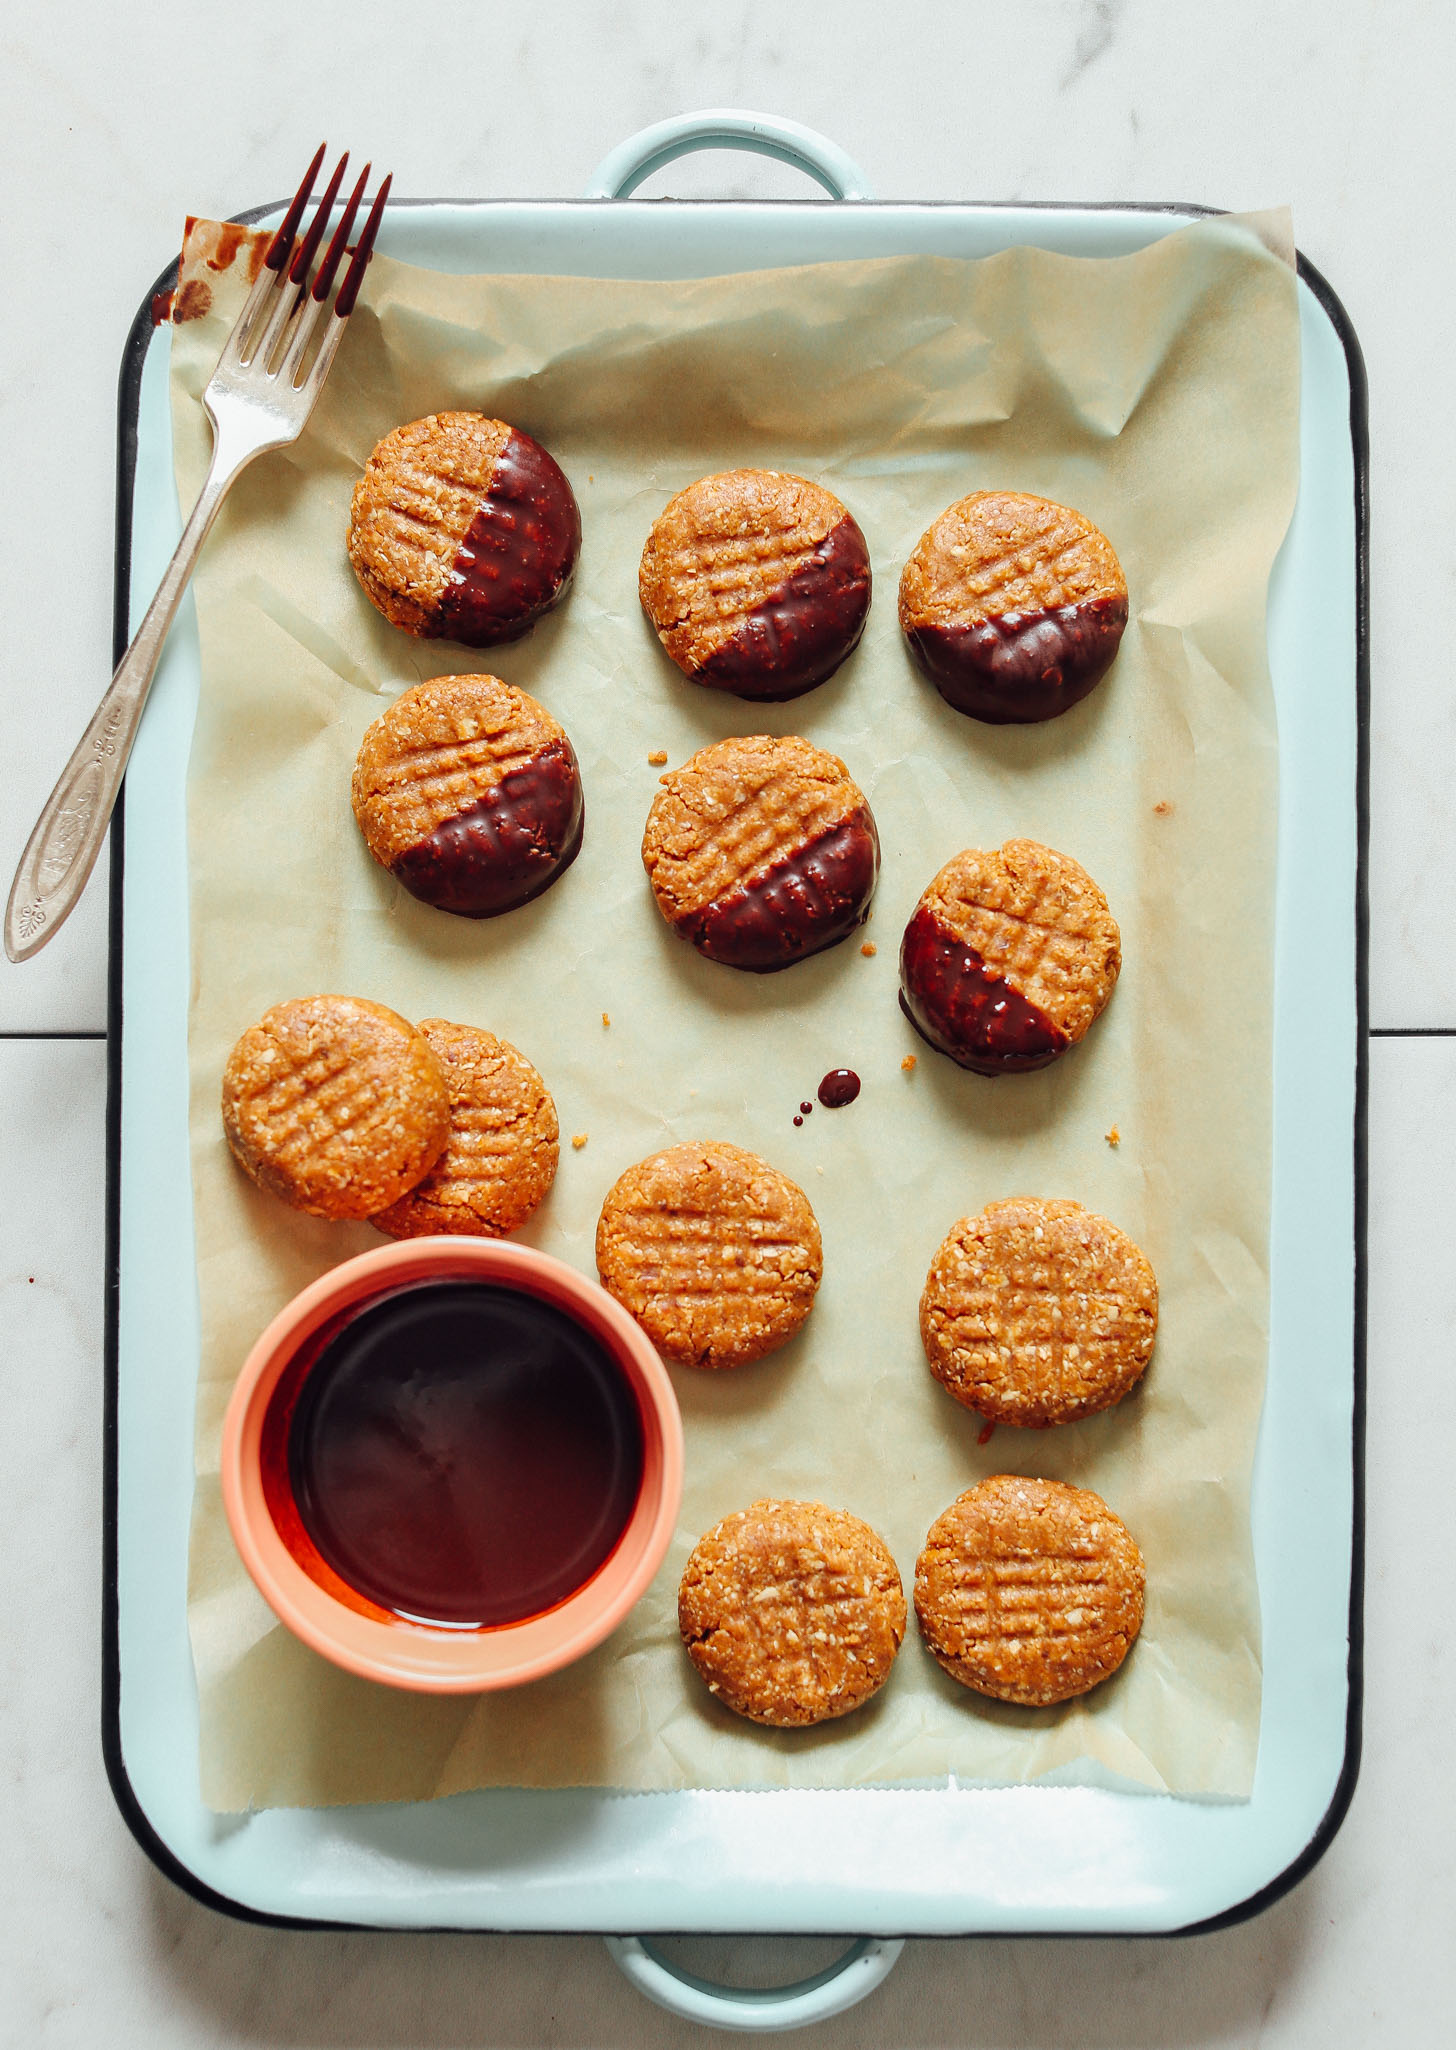 Dipping some of our 3-Ingredient Peanut Butter Cookies into homemade vegan chocolate sauce